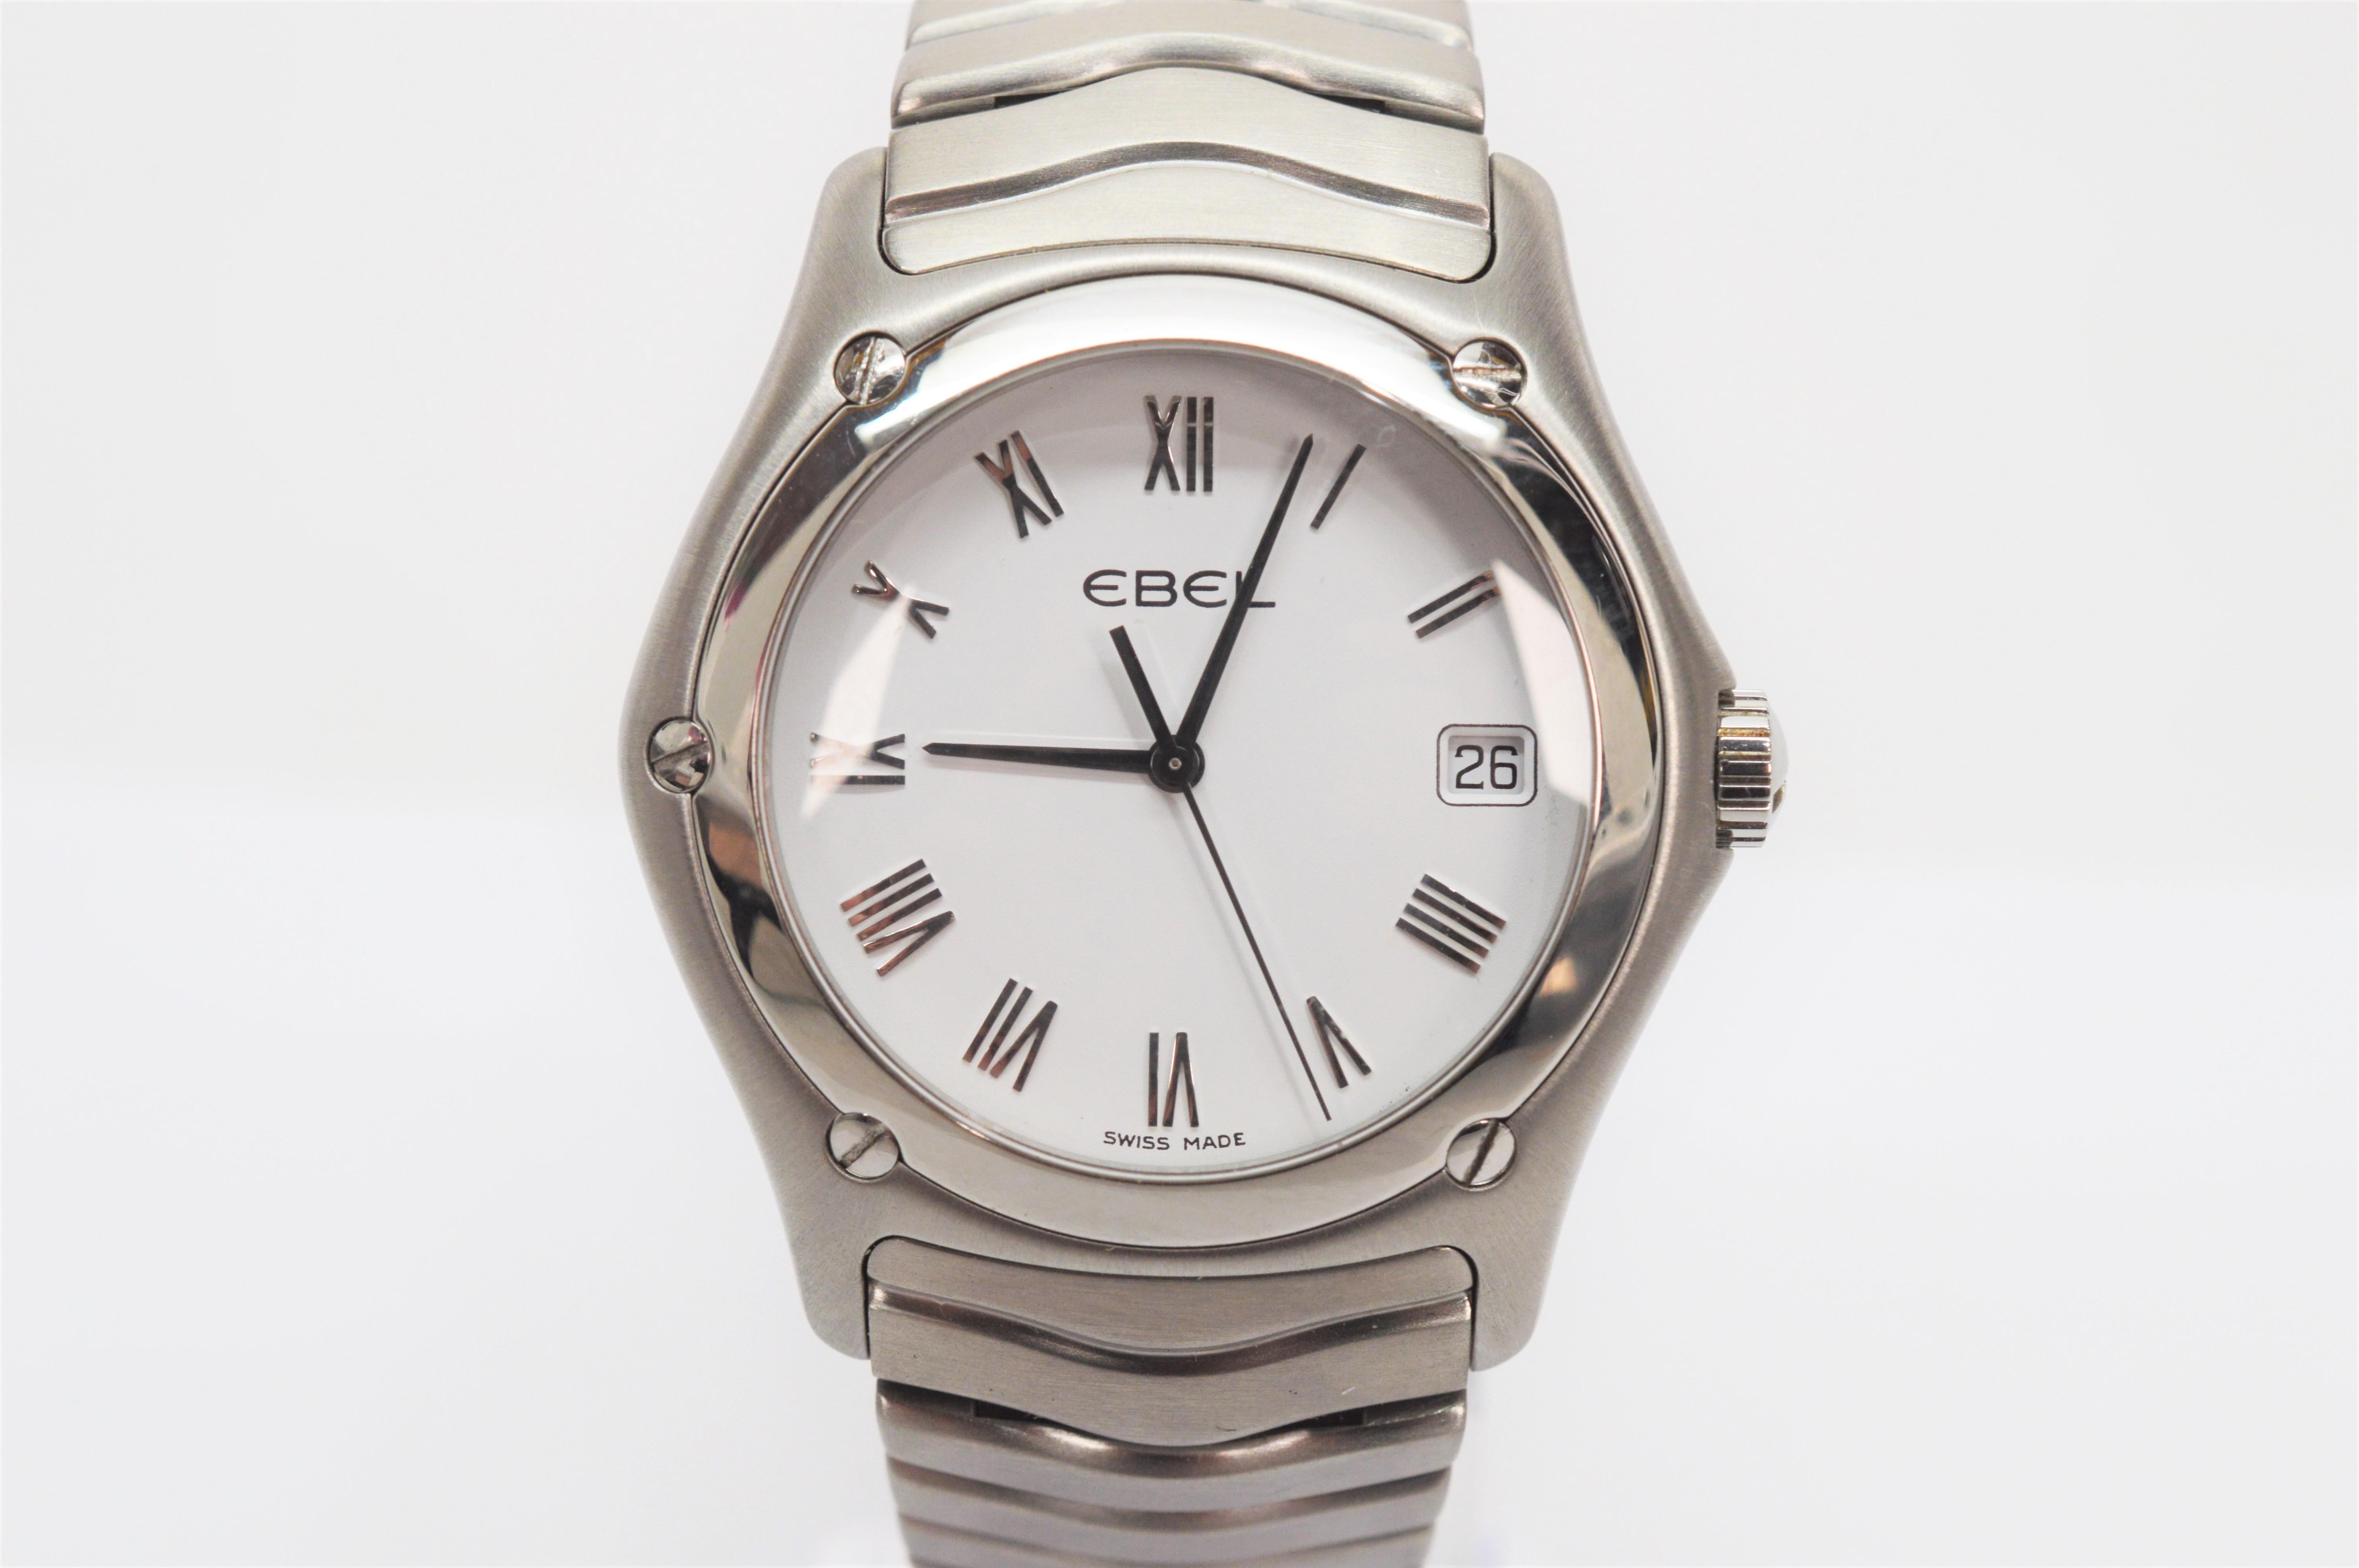 Swiss made with contemporary sport watch design, Ebel Classic Stainless Steel Men's / Unisex Watch Model Number E9187F41. The stainless steel watch case size is 37mm and wrist size is 7 inches. This sport watch features a scratch resistant sapphire